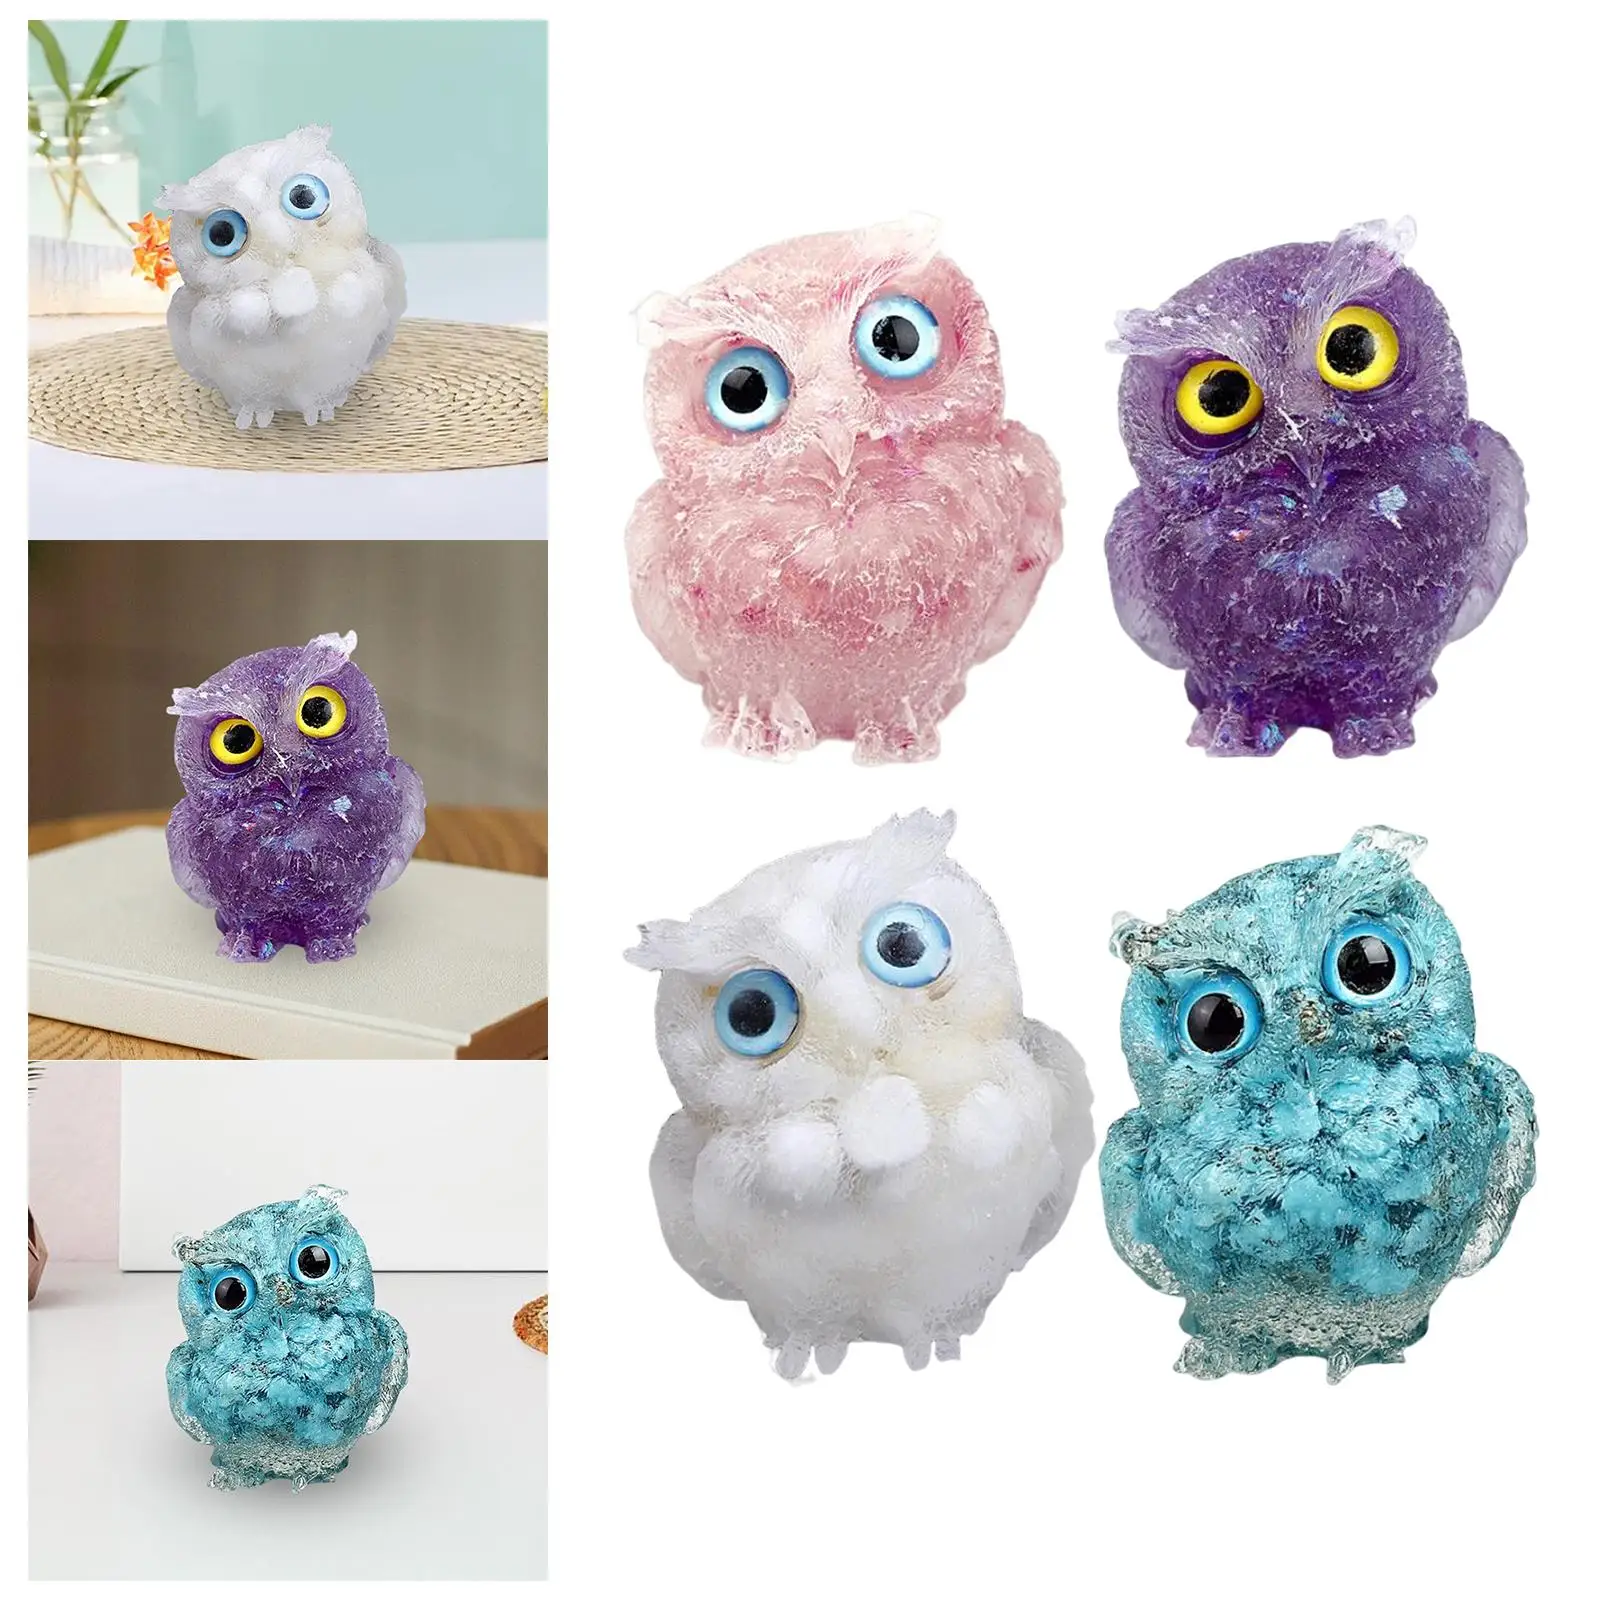 Creative Owl Statue Collectible Craft Natural Crystal Owl Ornament for Office Desktop Home Decor Accents Housewarming Gift